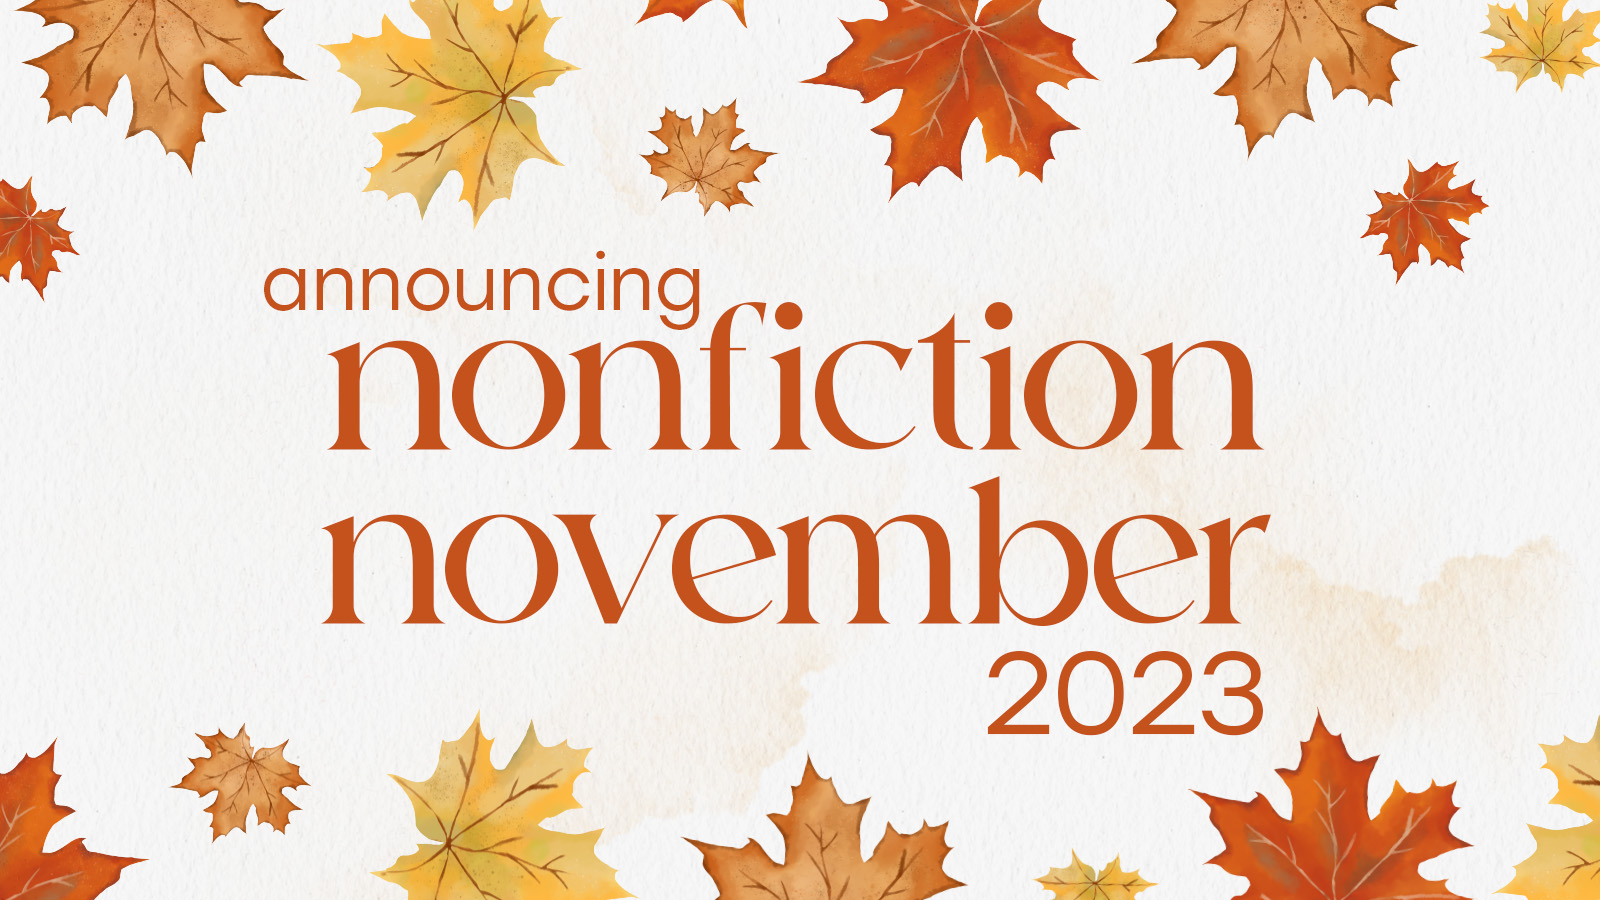 Nonfiction November 2023 is here